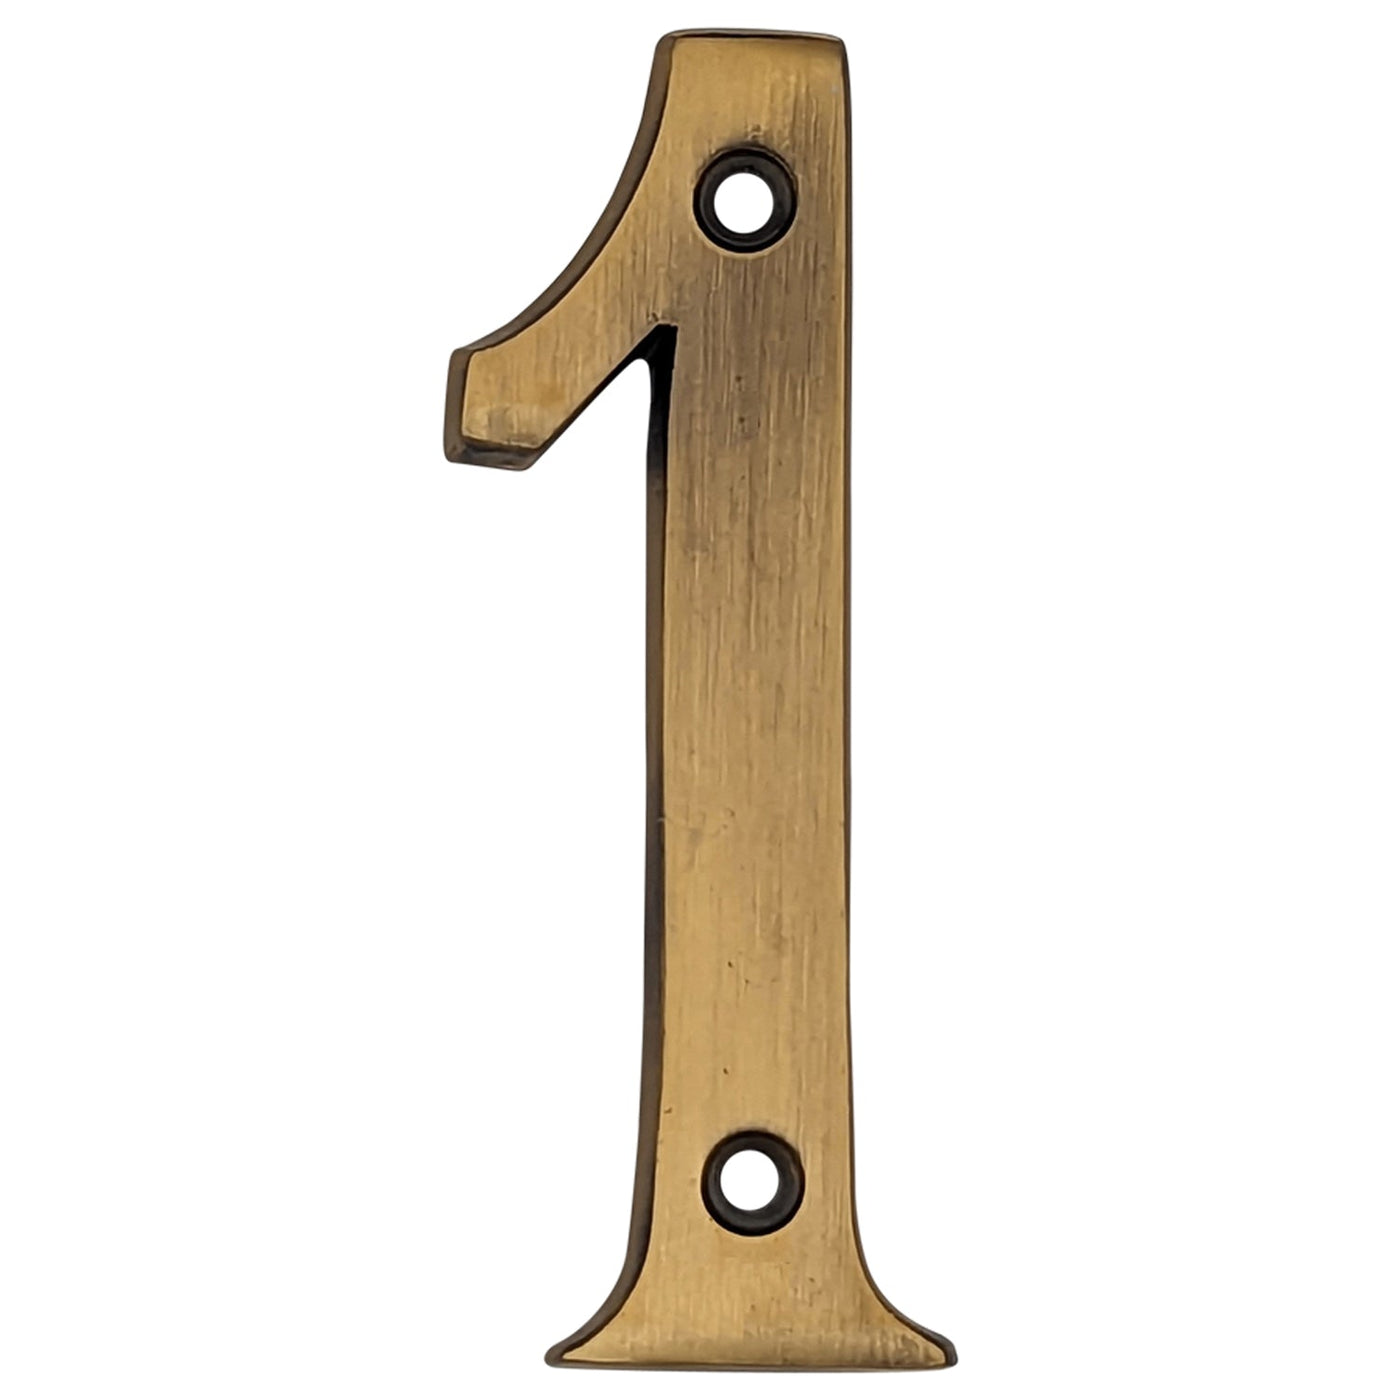 4 Inch Tall House Number 1